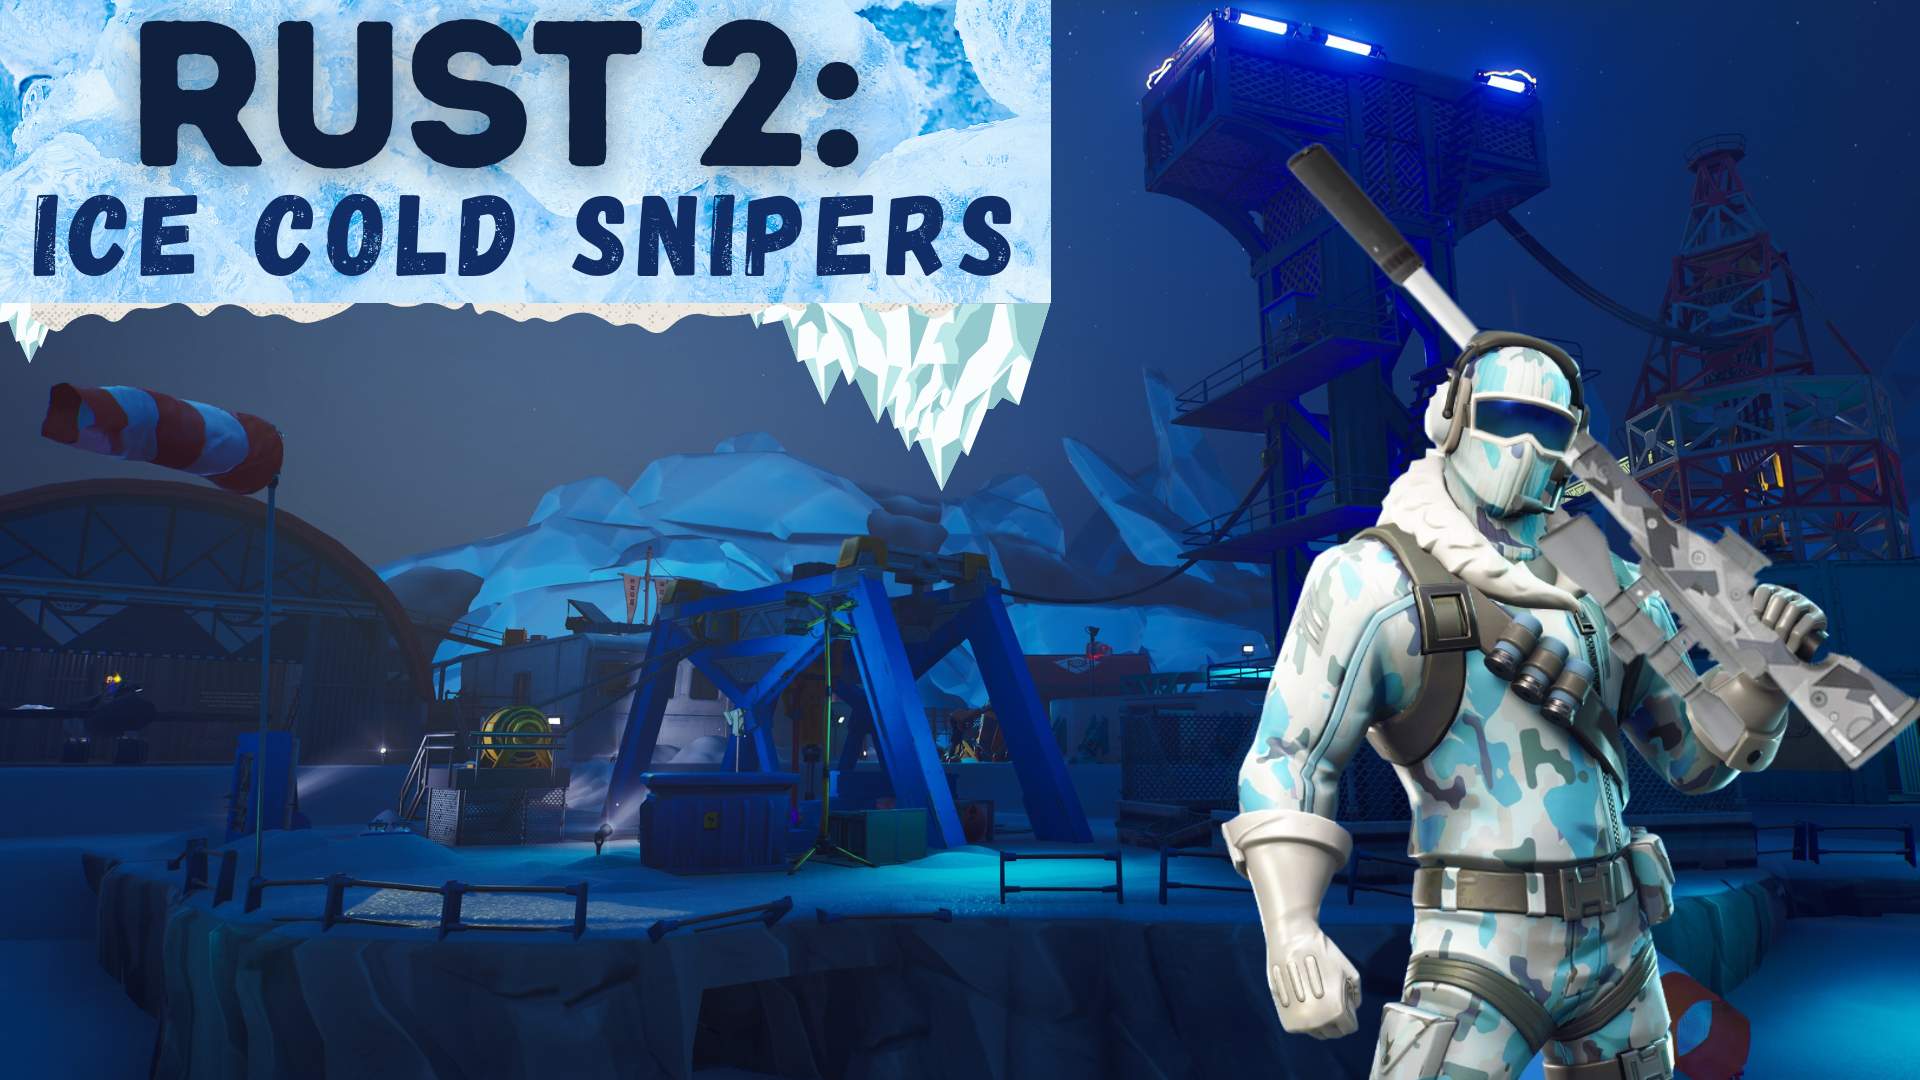 Rust 2: Ice Cold (Sniper Shootout) image 2